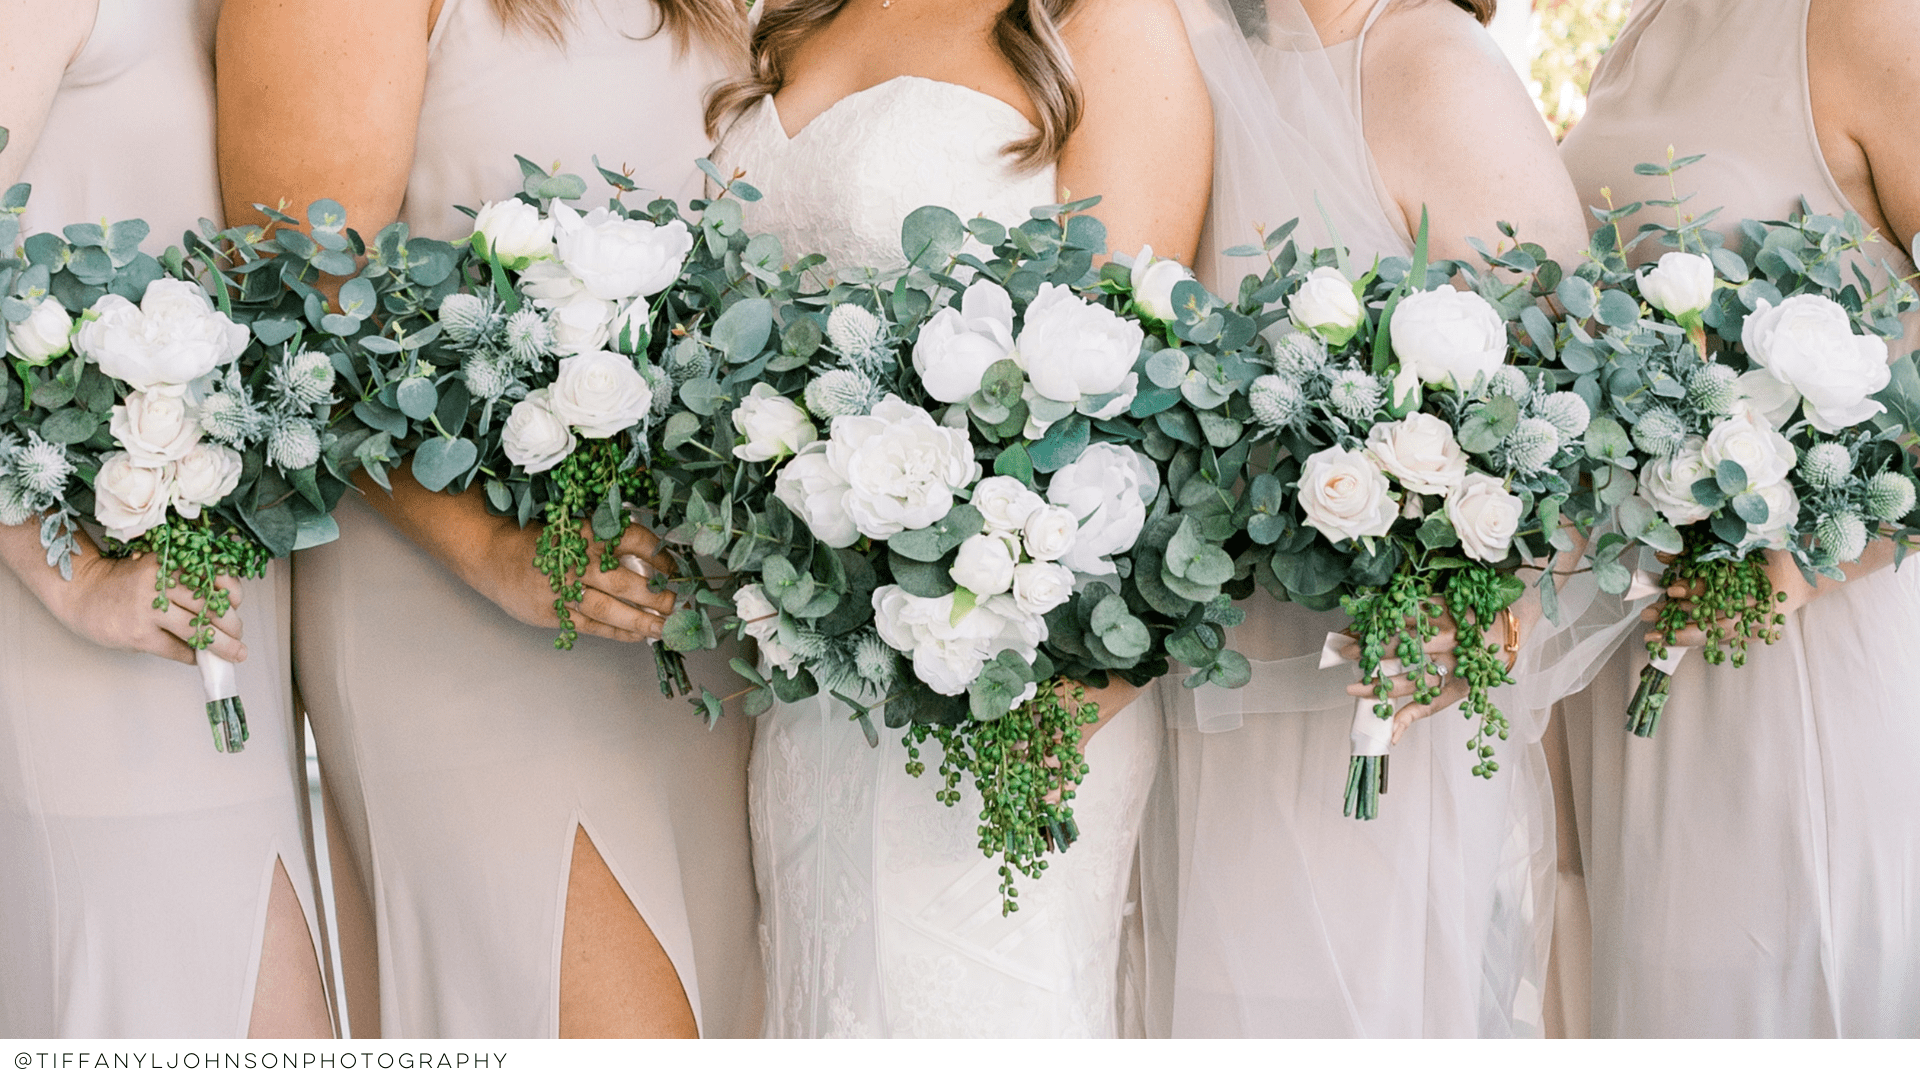 How Much do Wedding Flowers Cost in 2021?